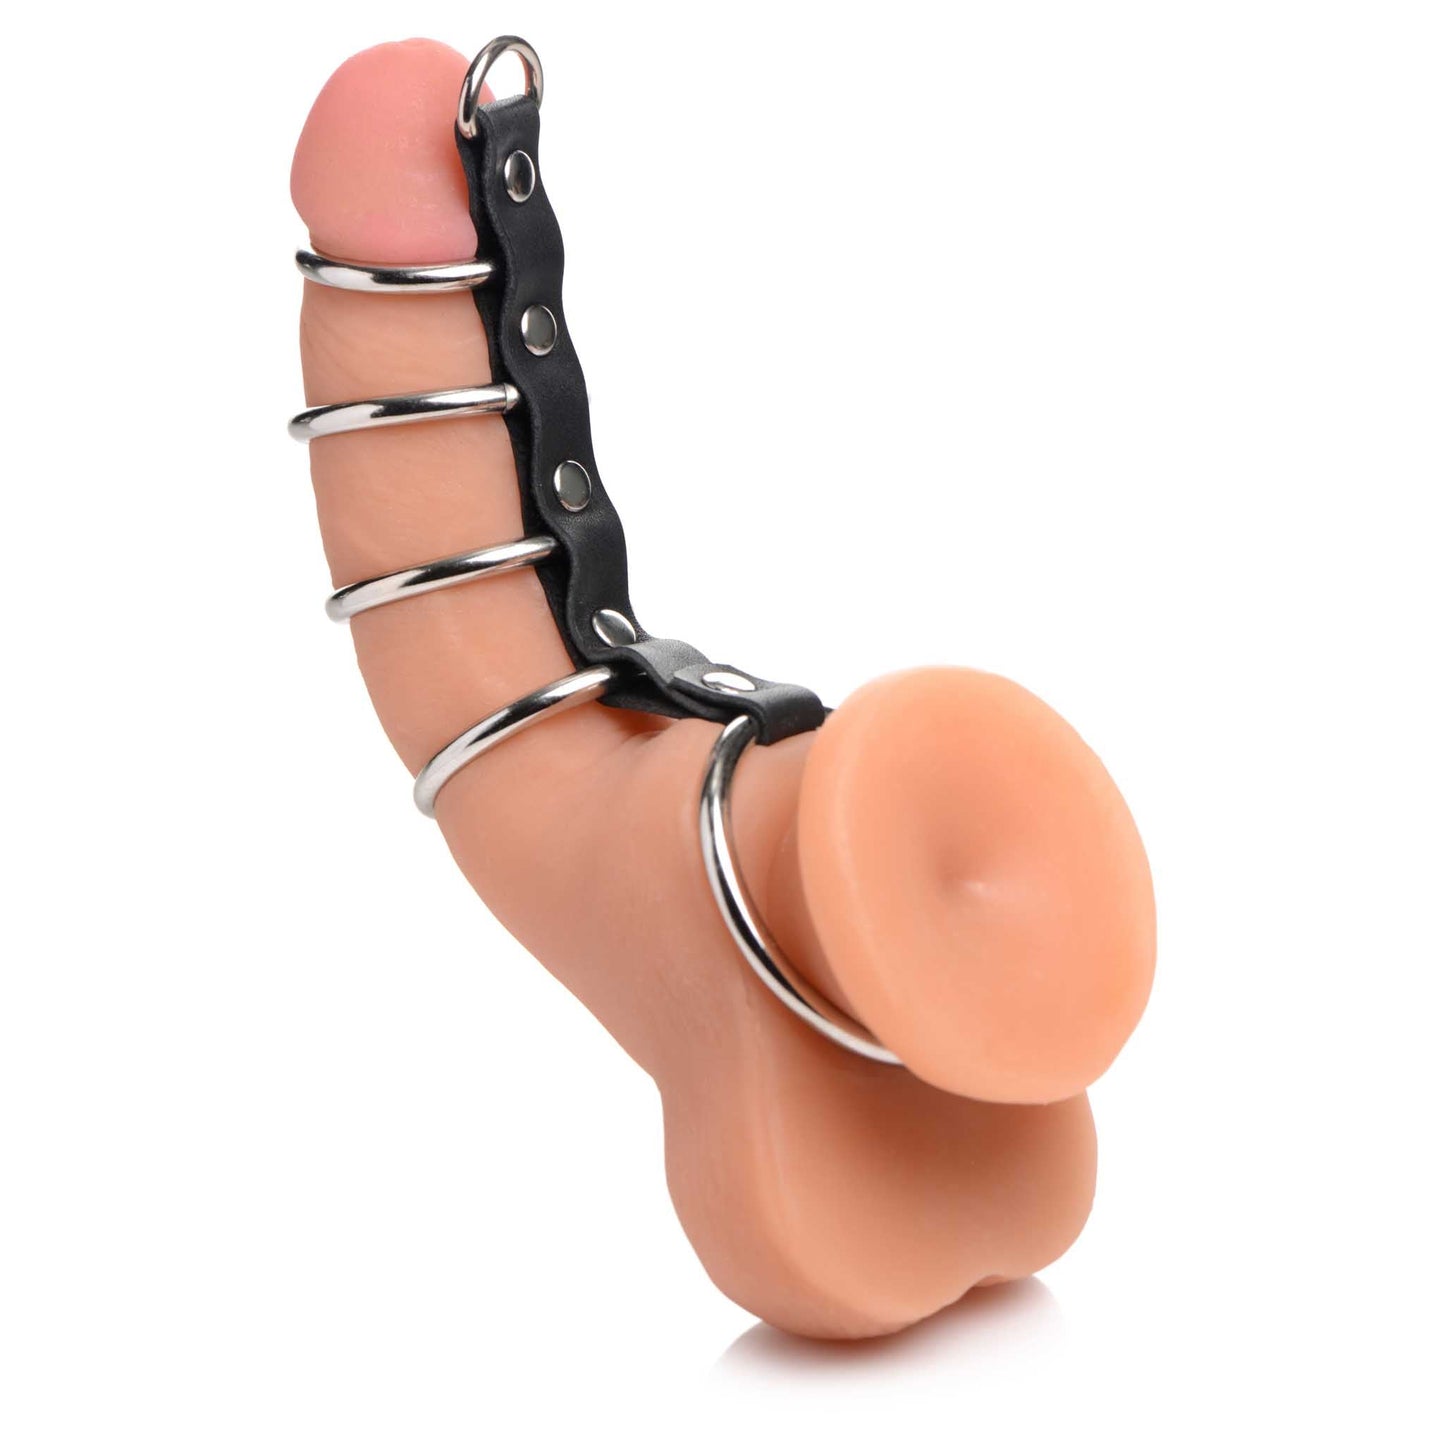 Cock Gear Gates of Hell Chastity Device - Black/Silver